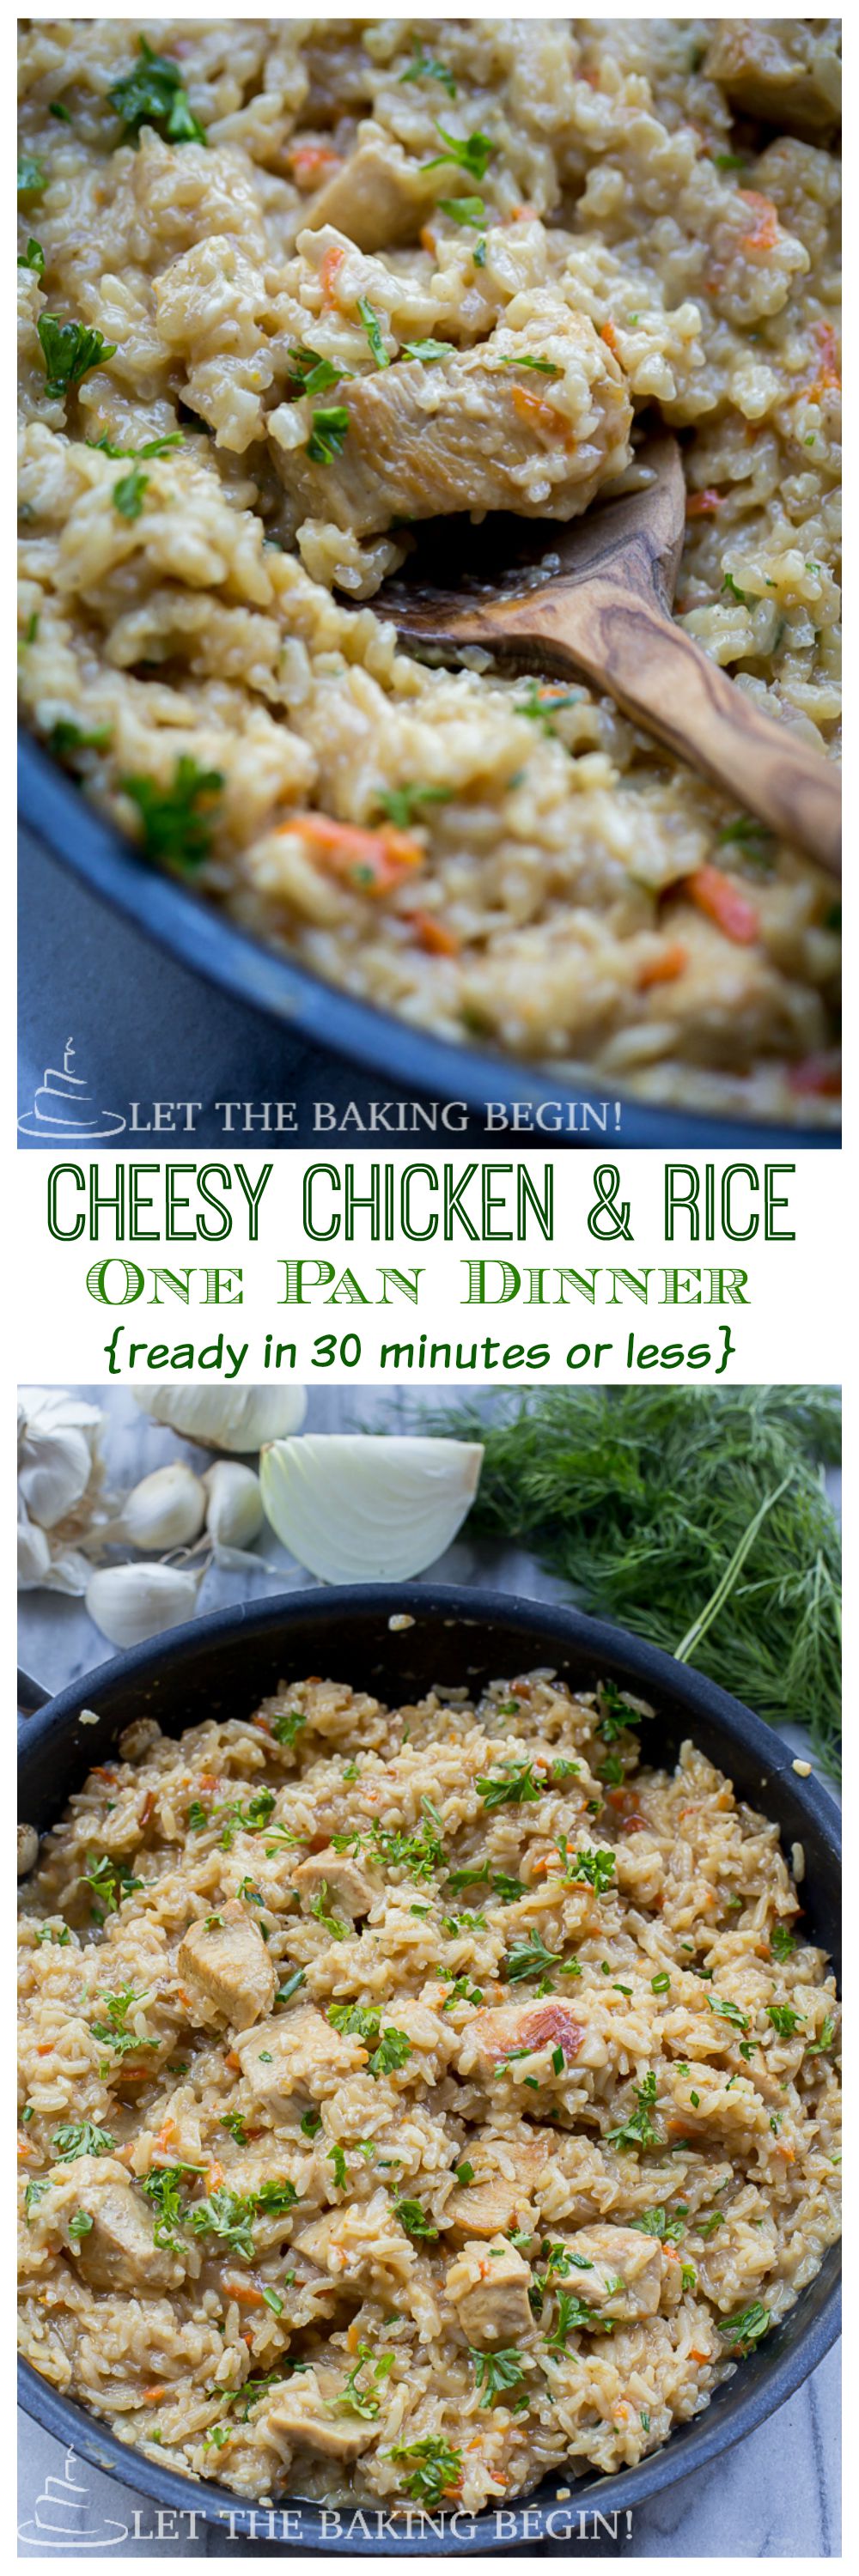 Cheesy Chicken & Rice One Pot Dinner {in 30 Minutes or less) 